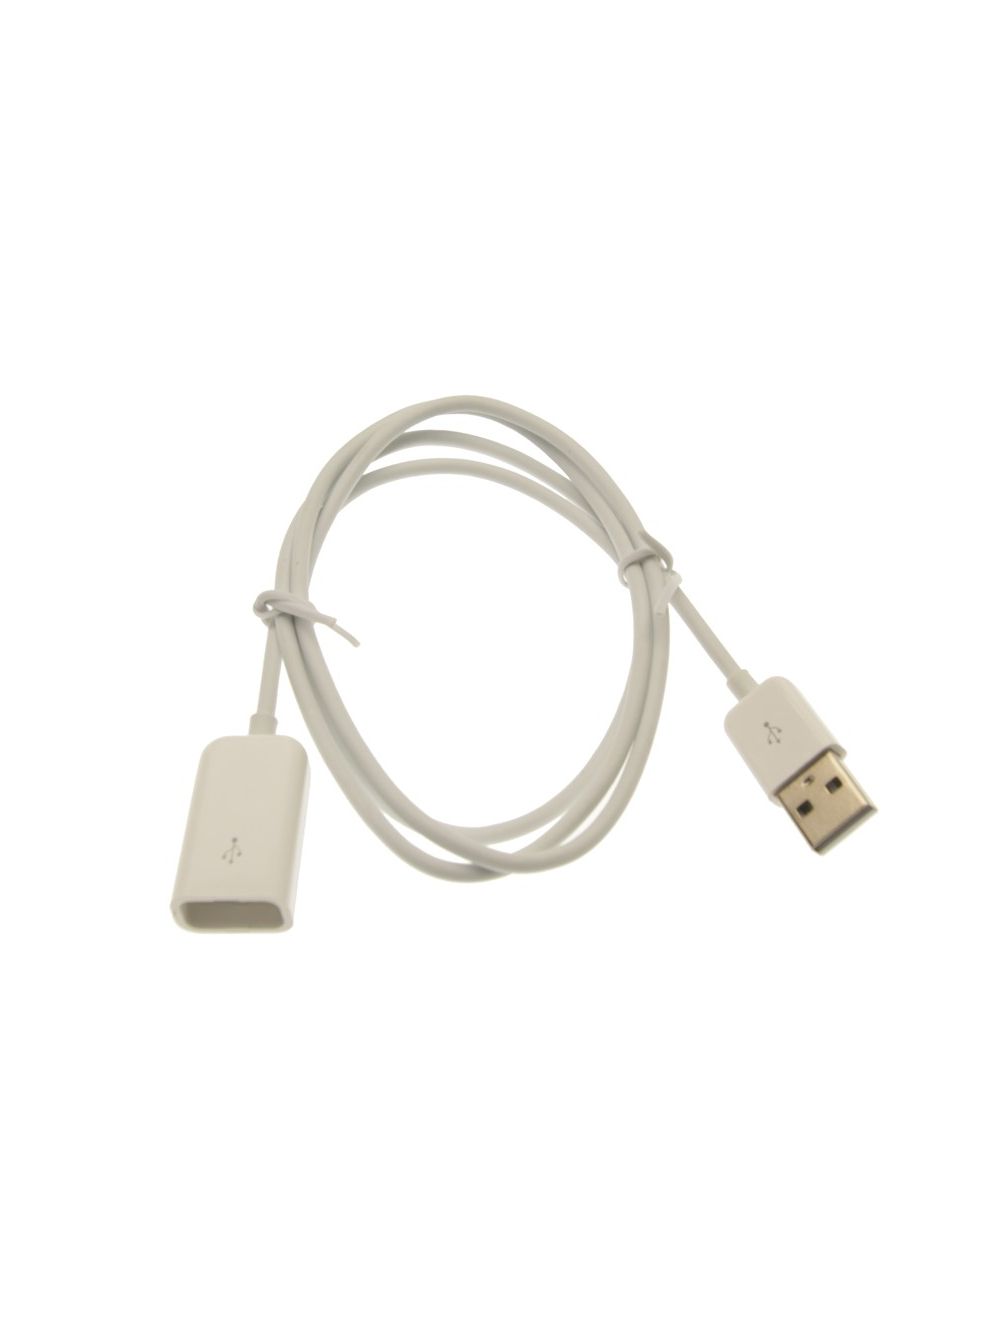 Evercoss 3 Feet USB 2.0 A Male to A Male Cable White 